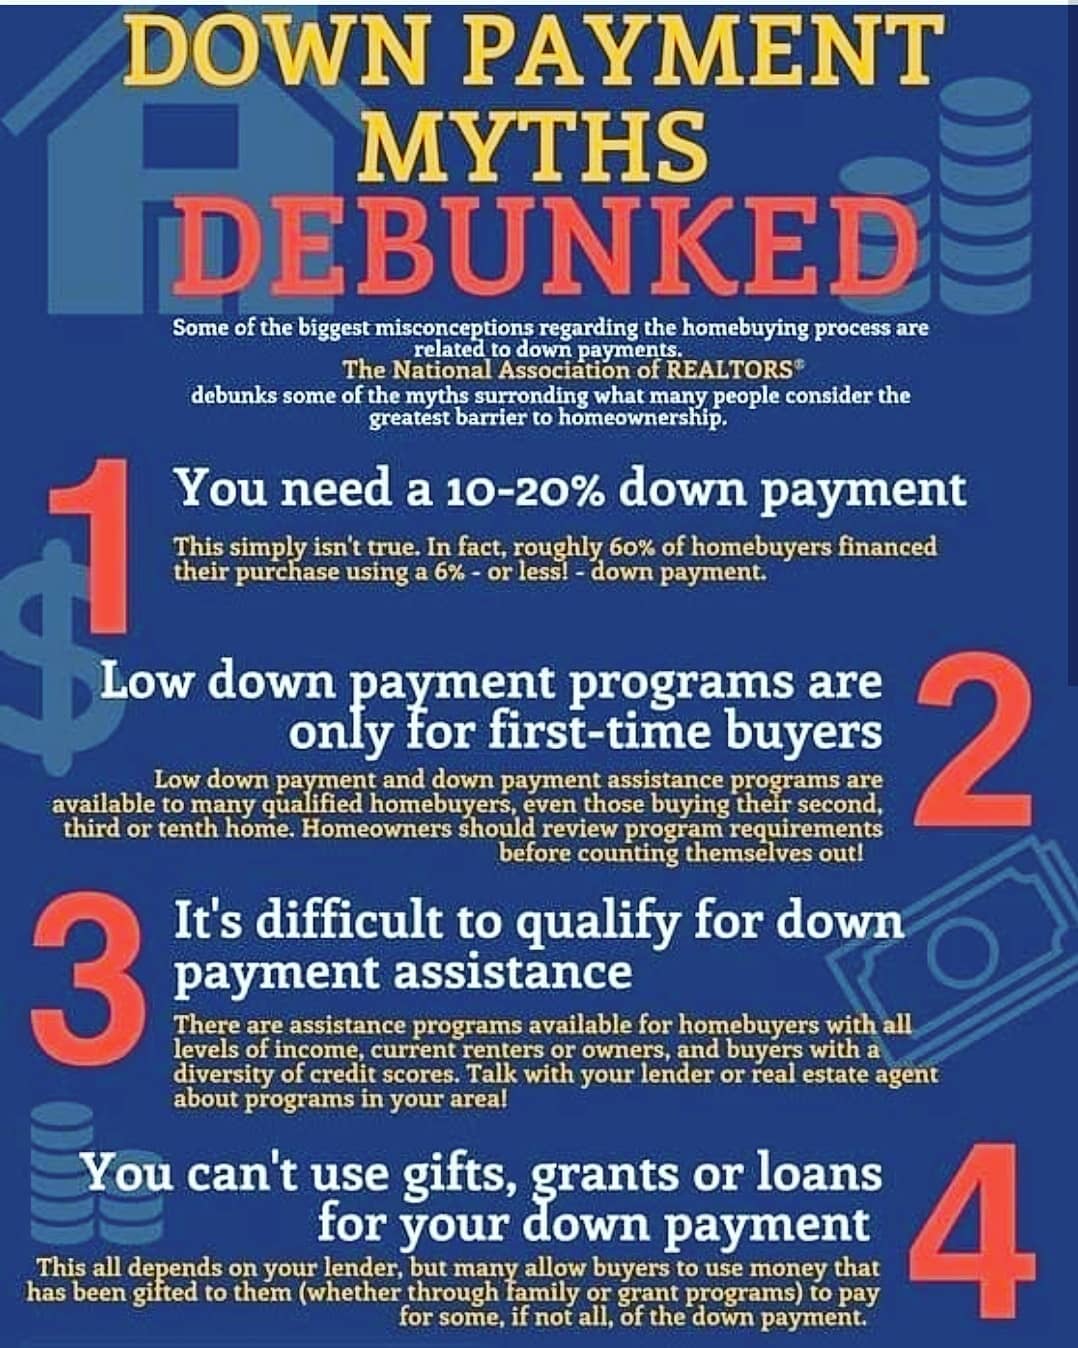 Down Payment Myths